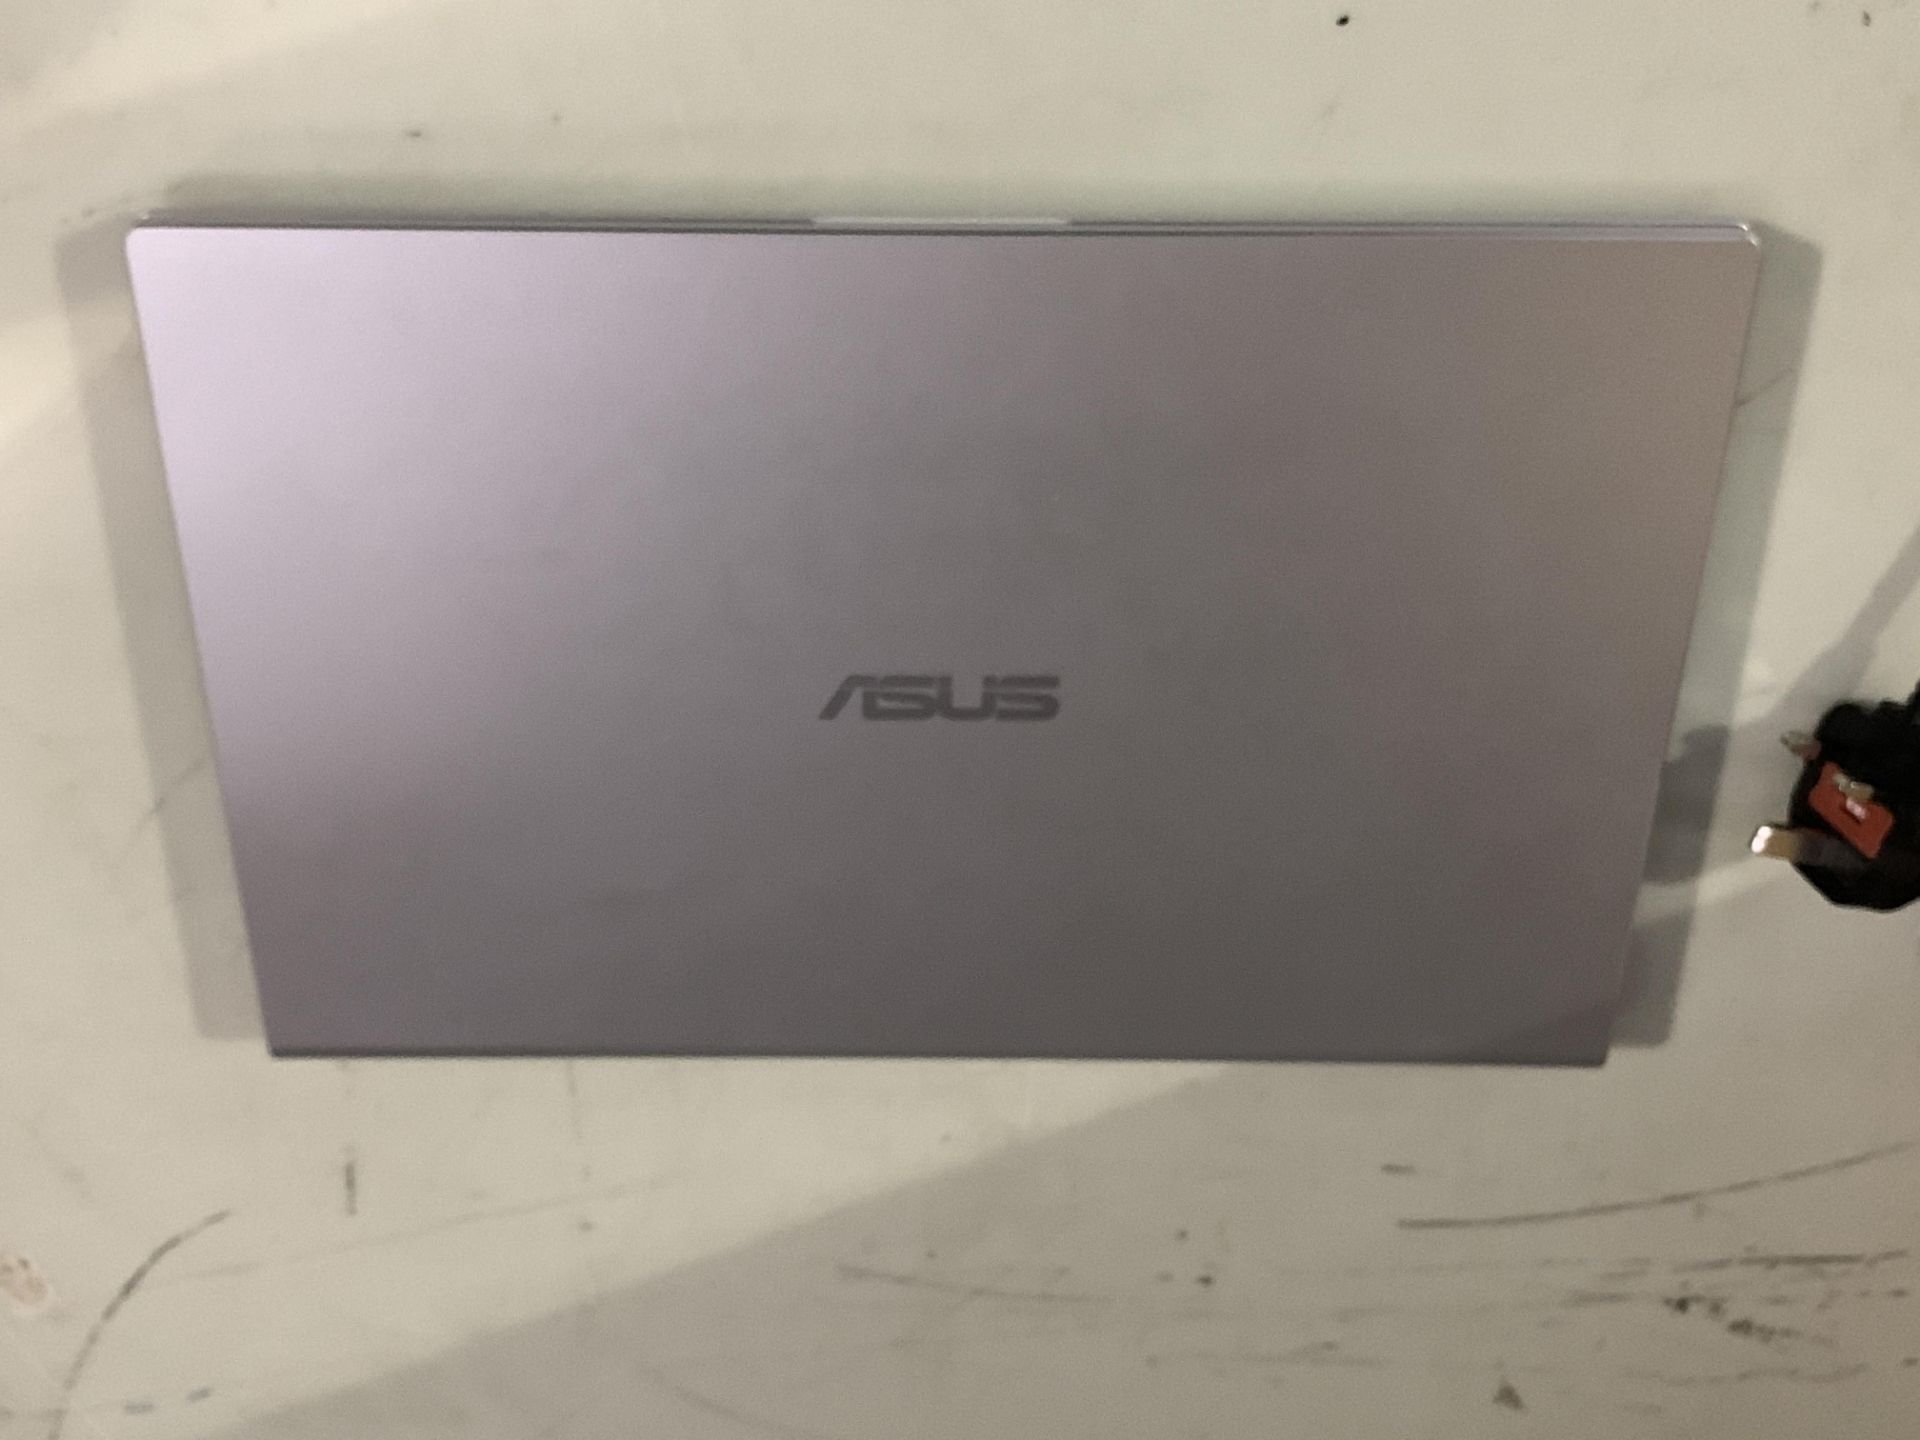 ASUS X515J Notebook with Charger - Hard Drive Removed - Image 2 of 5